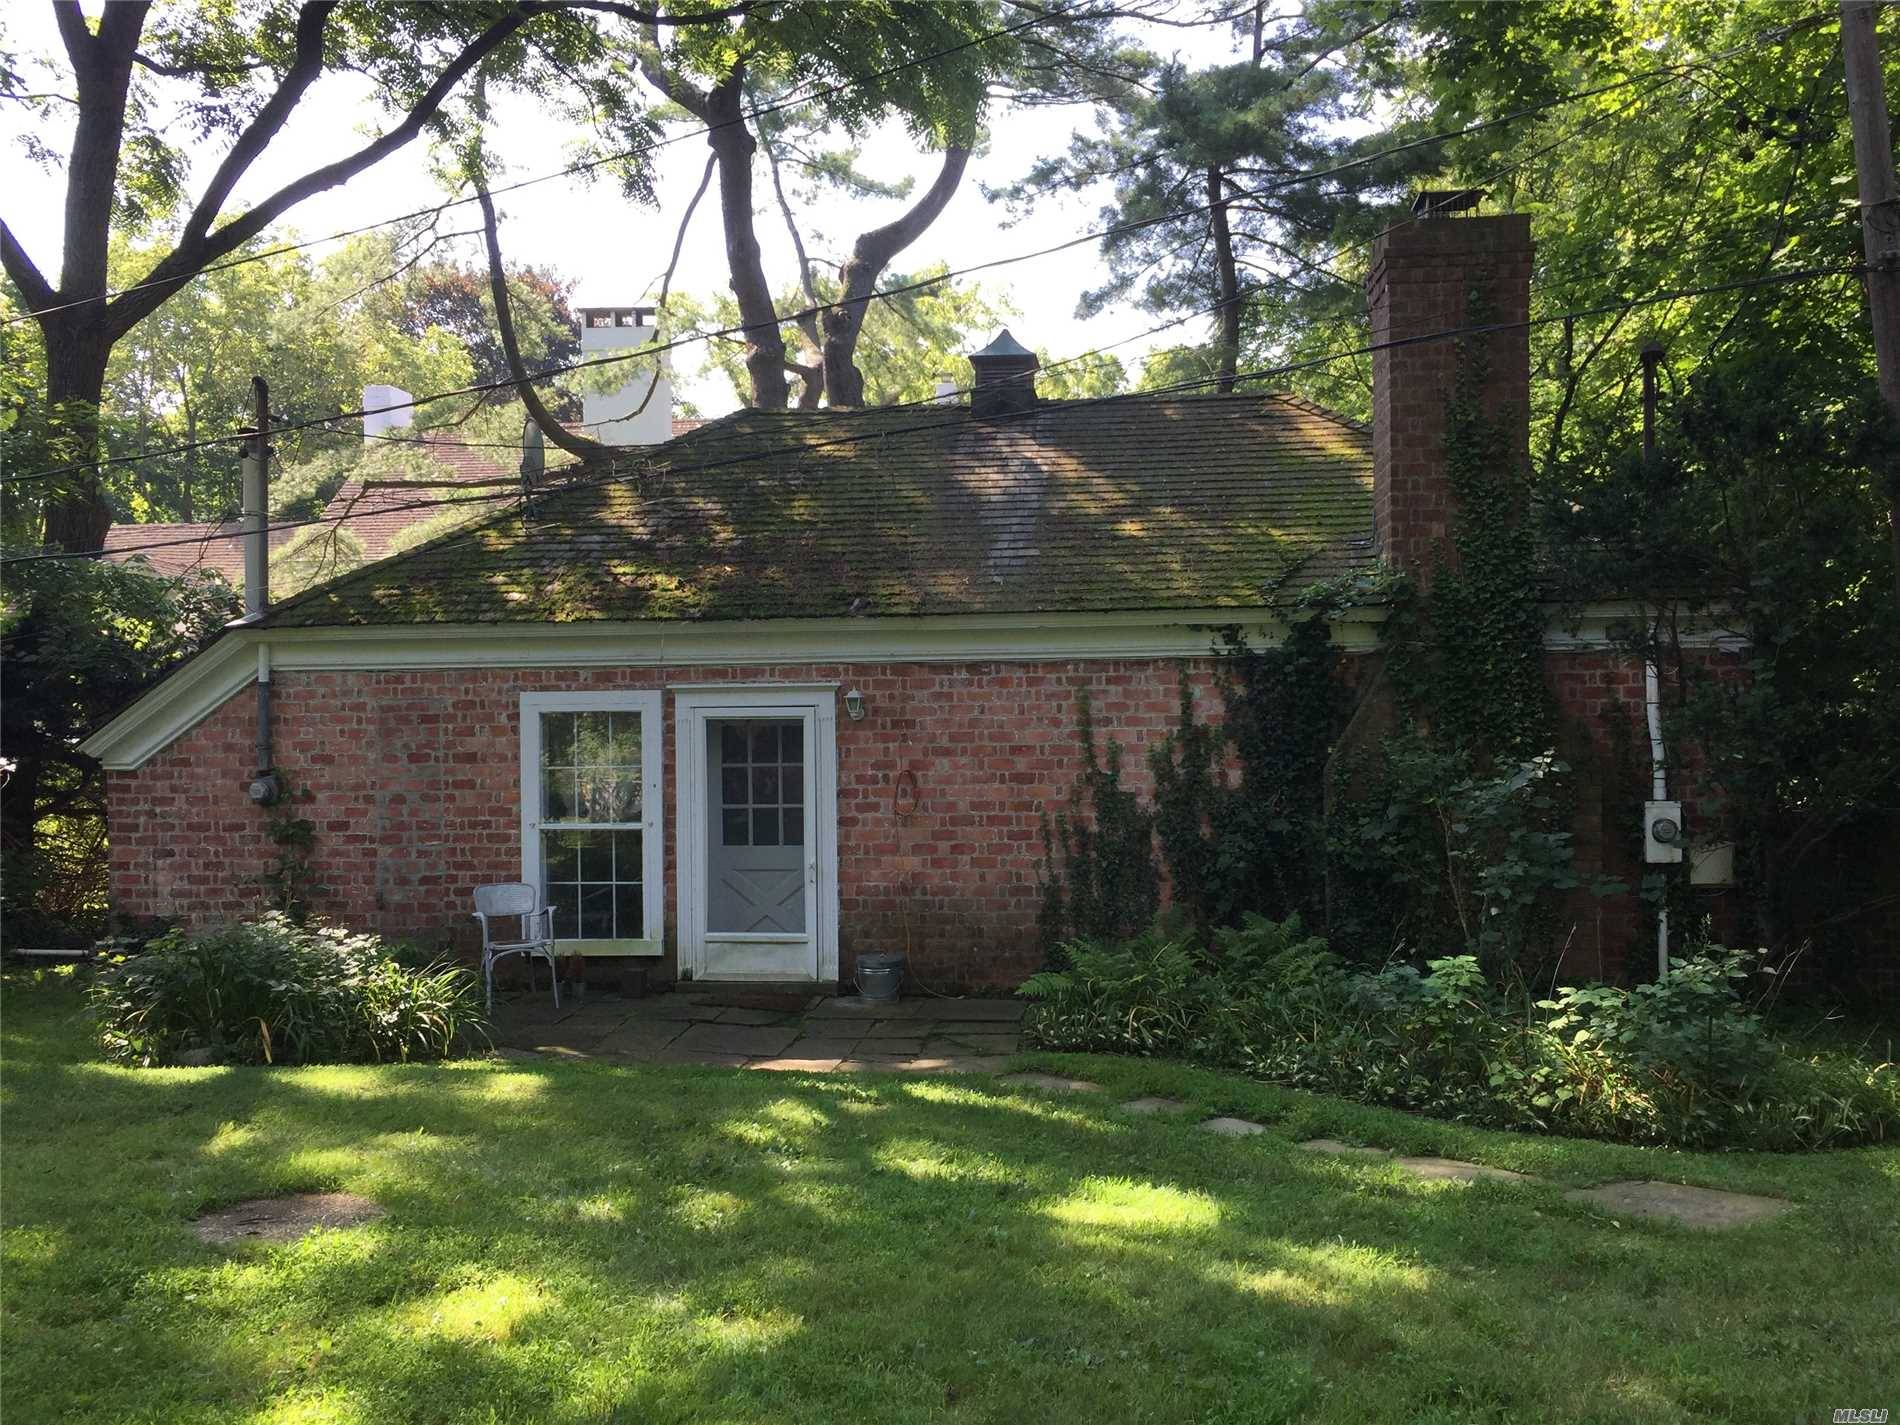 Estate Brick Cottage On Private One Acre, Ground Care Included.